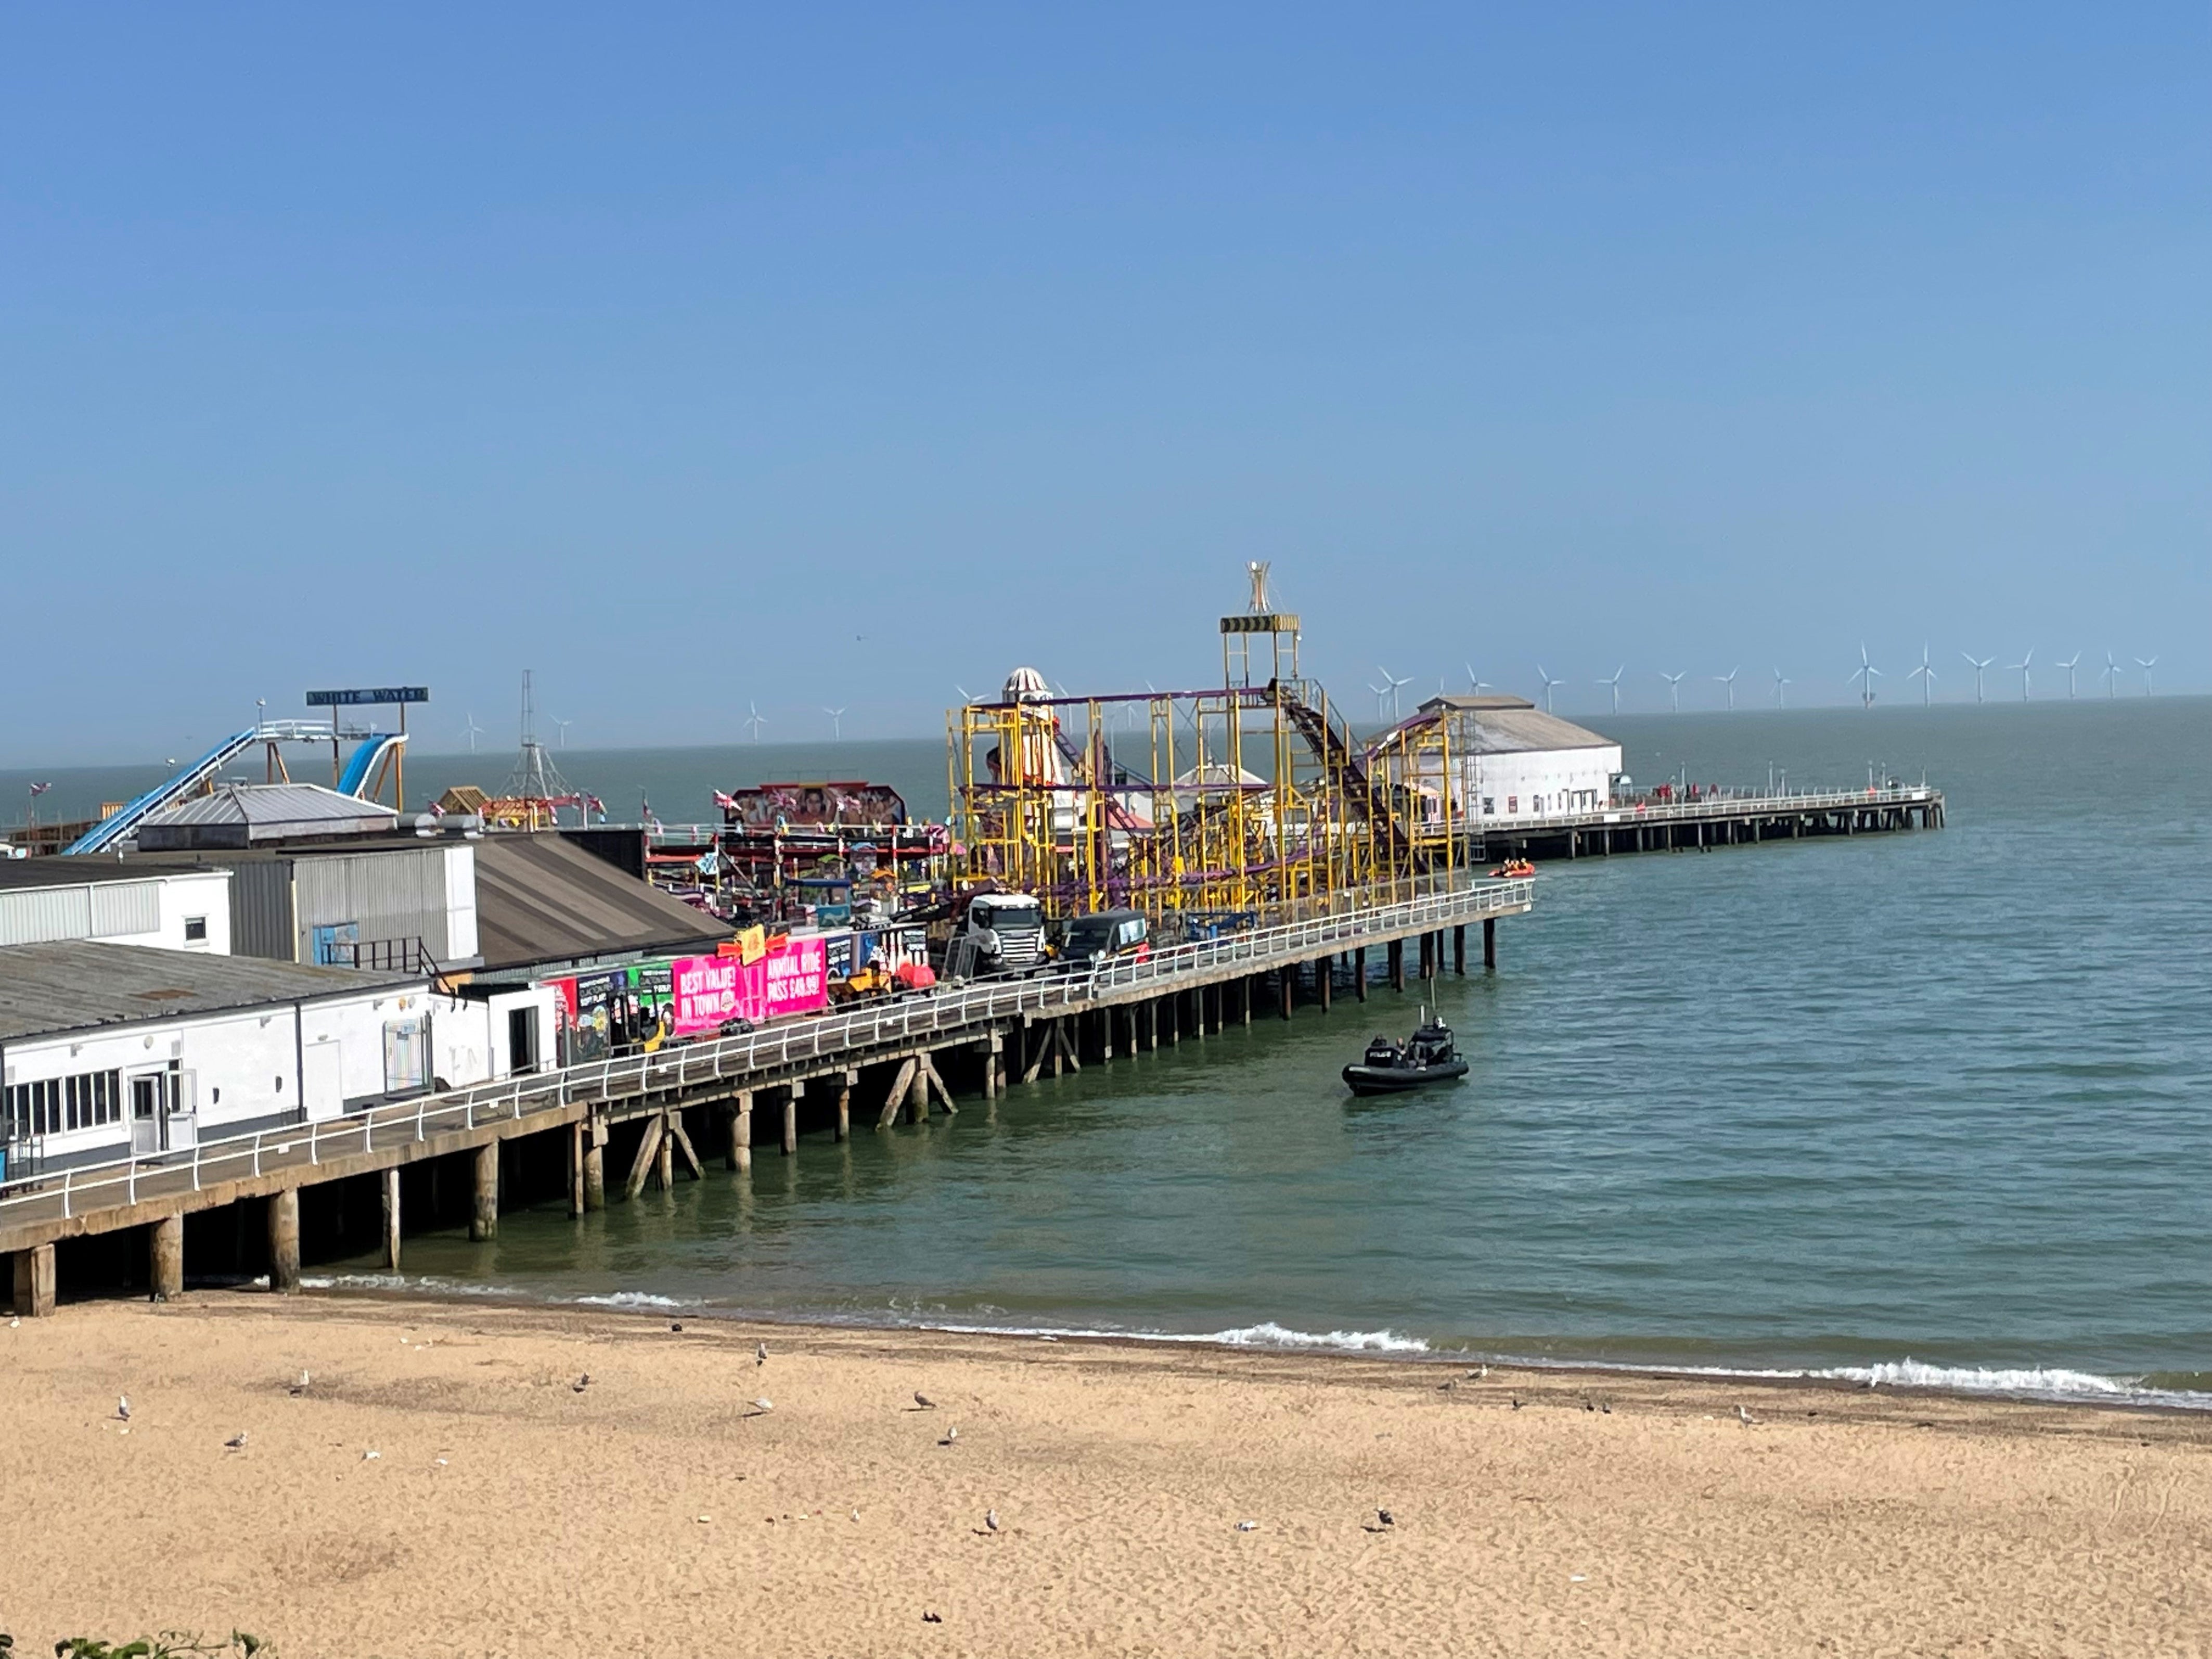 Sujal Sahu was swimming near Clacton Pier, Essex, when he went missing (Sam Russell/PA)